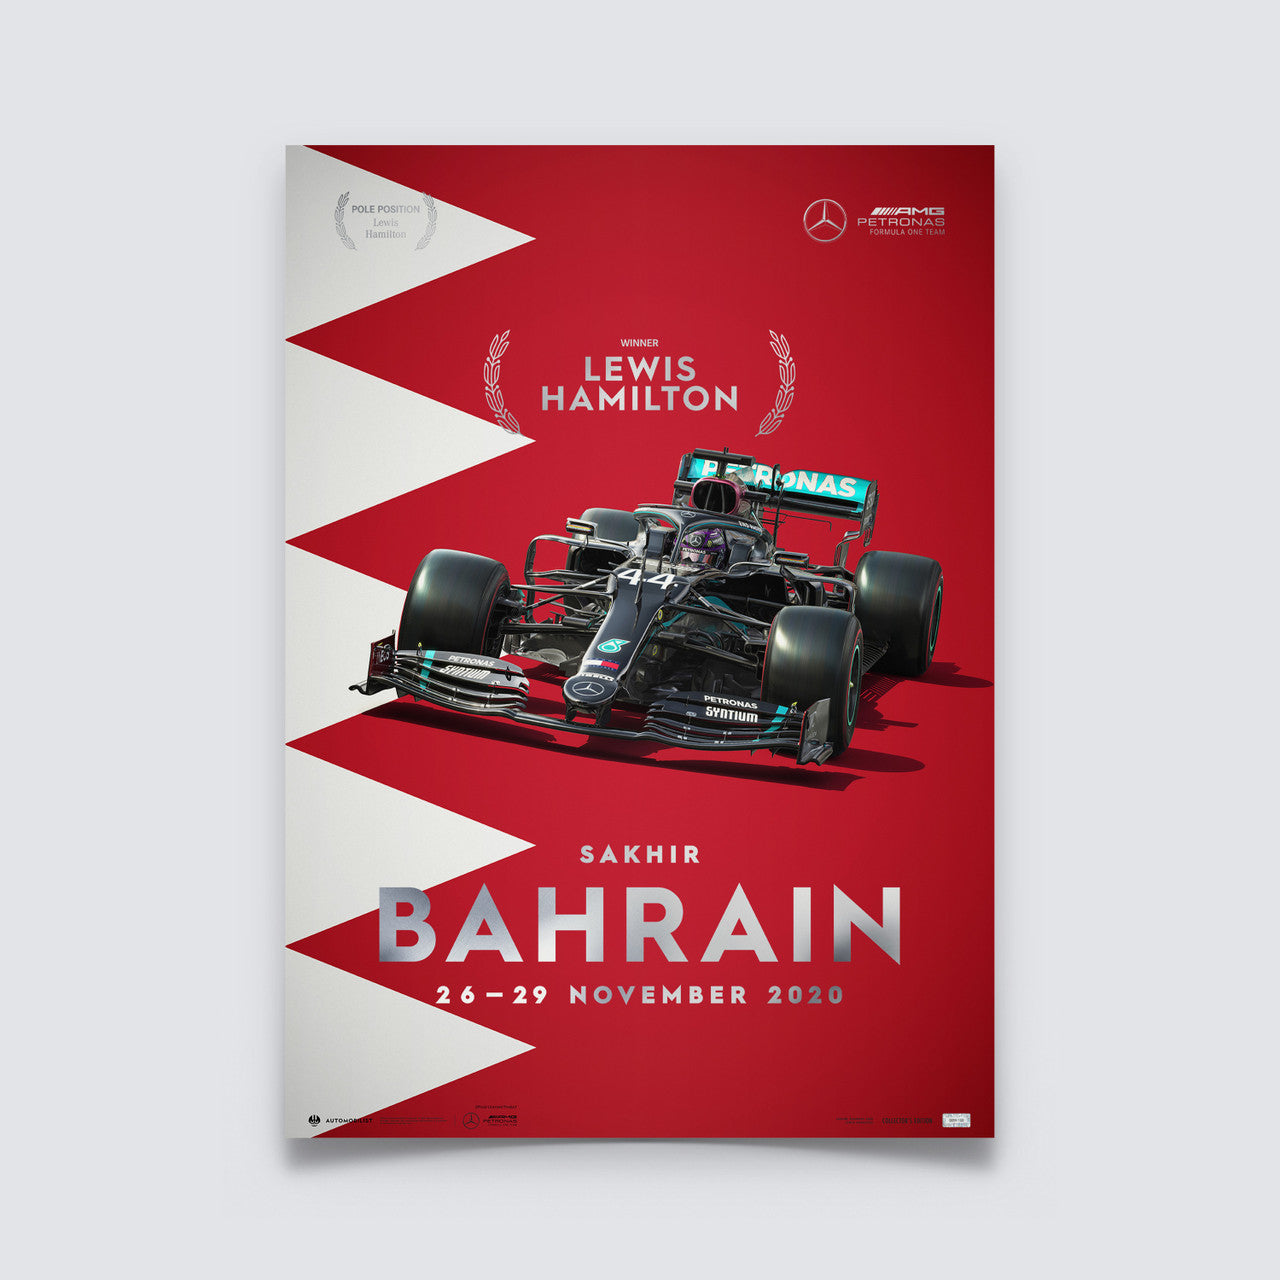 Lewis Hamilton 2014 Limited Edition Poster